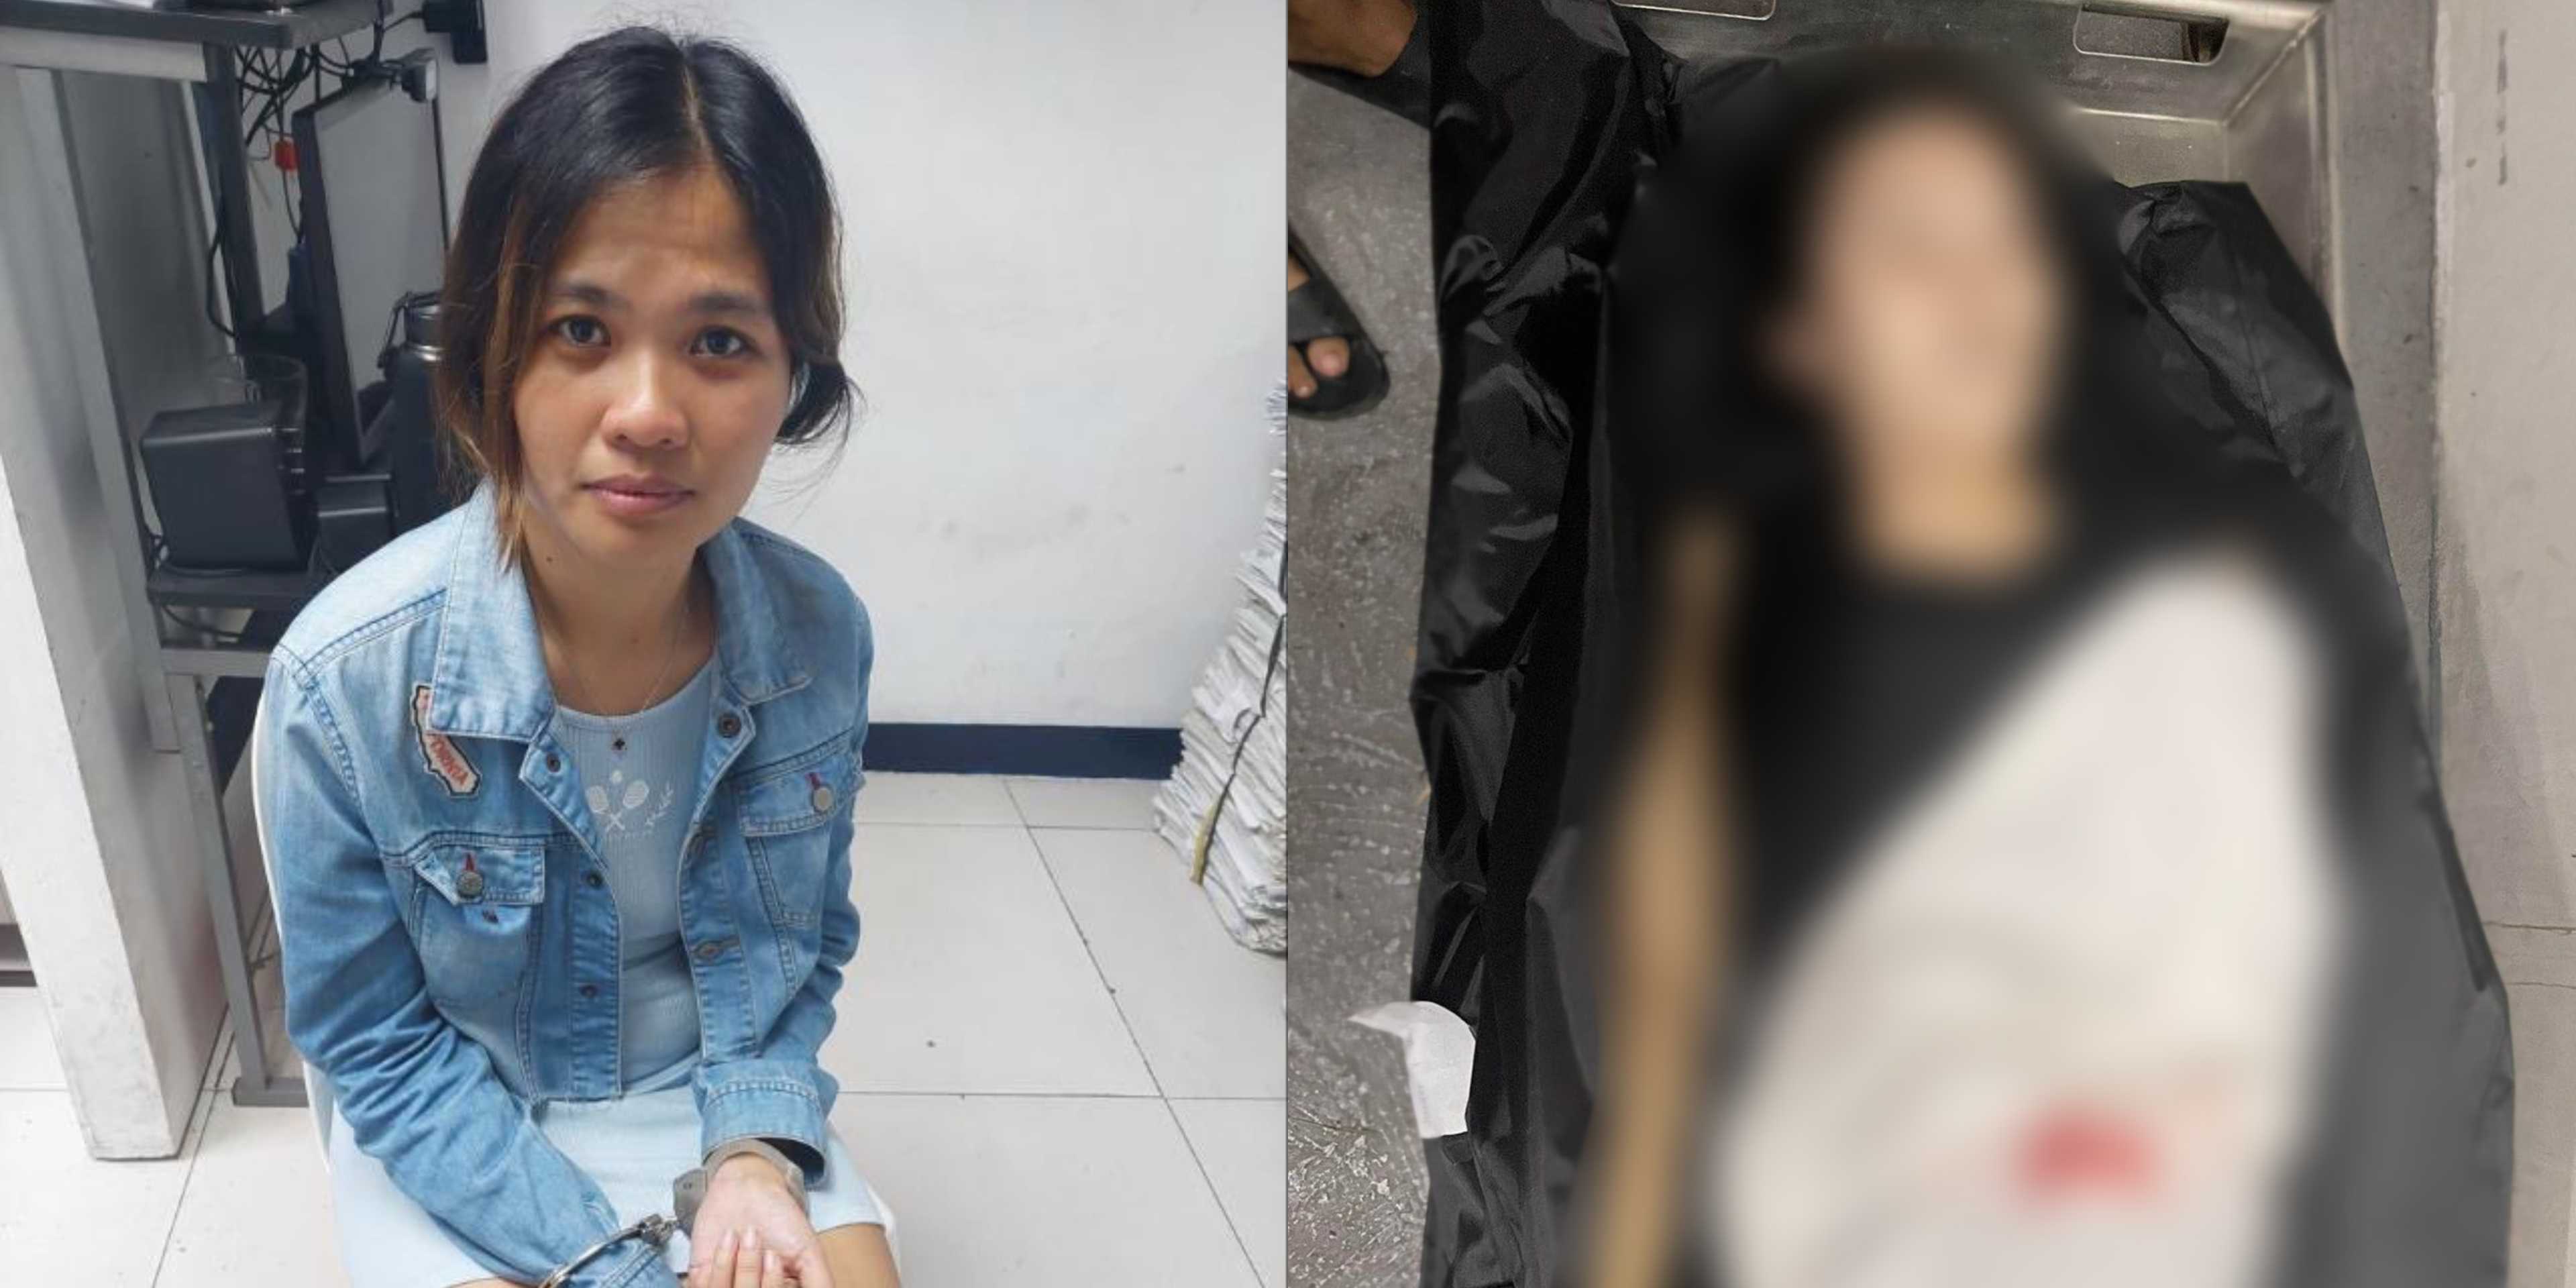 Women stabbed by friend in QC over cheating accusation